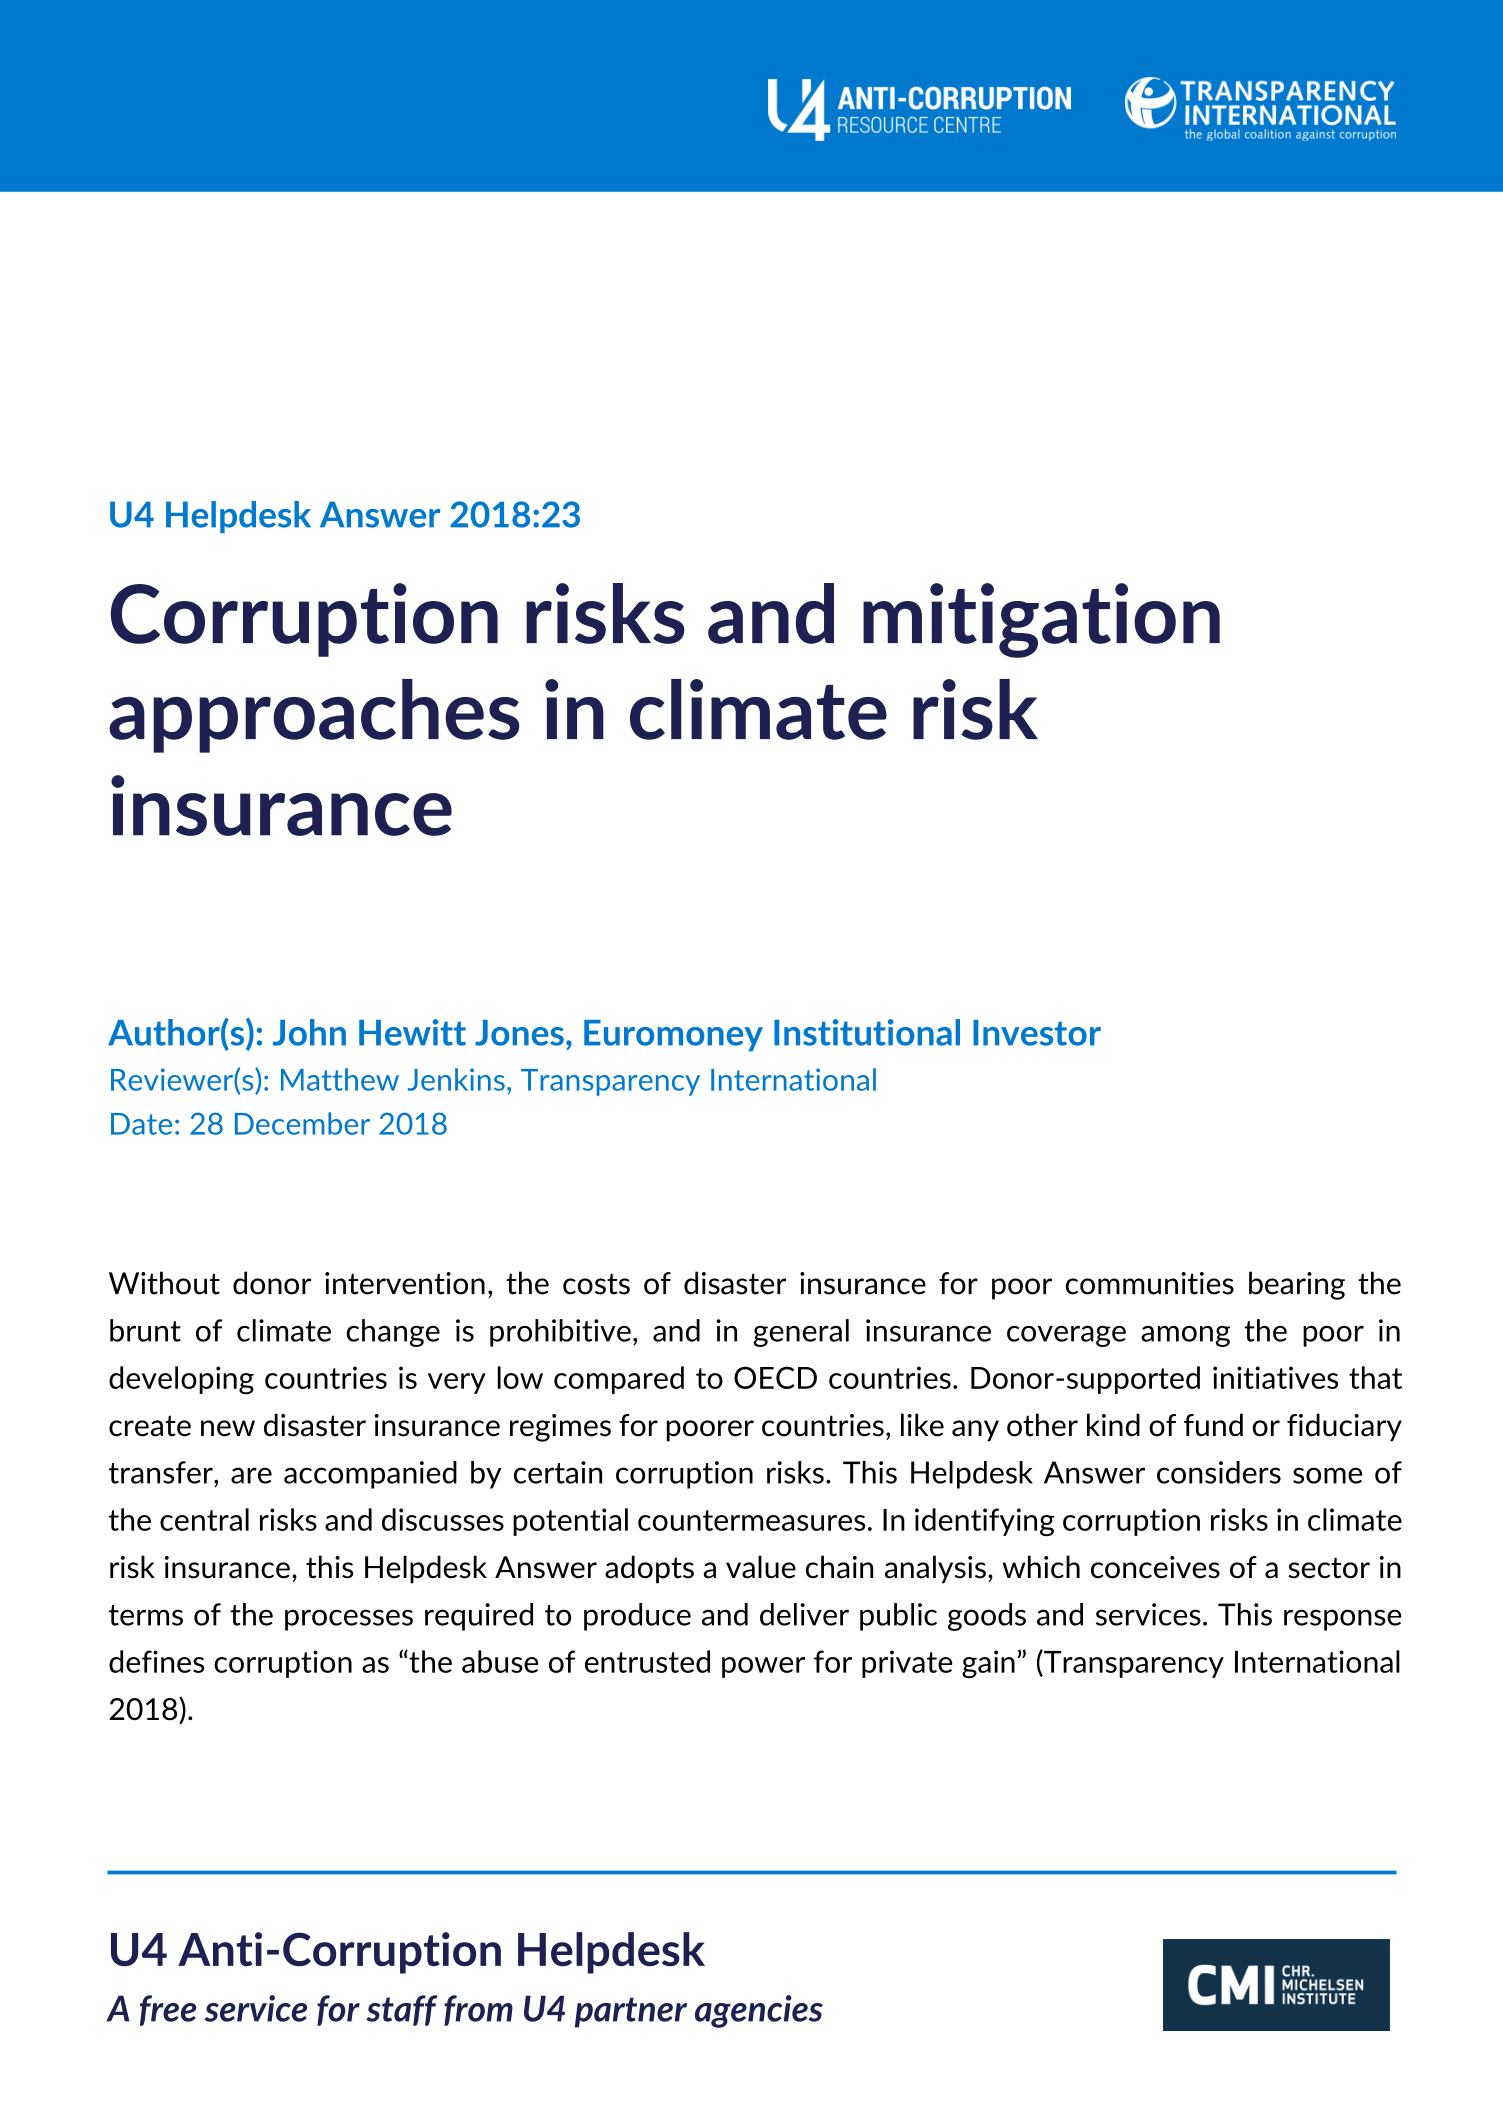 Corruption risks and mitigation approaches in climate risk insurance